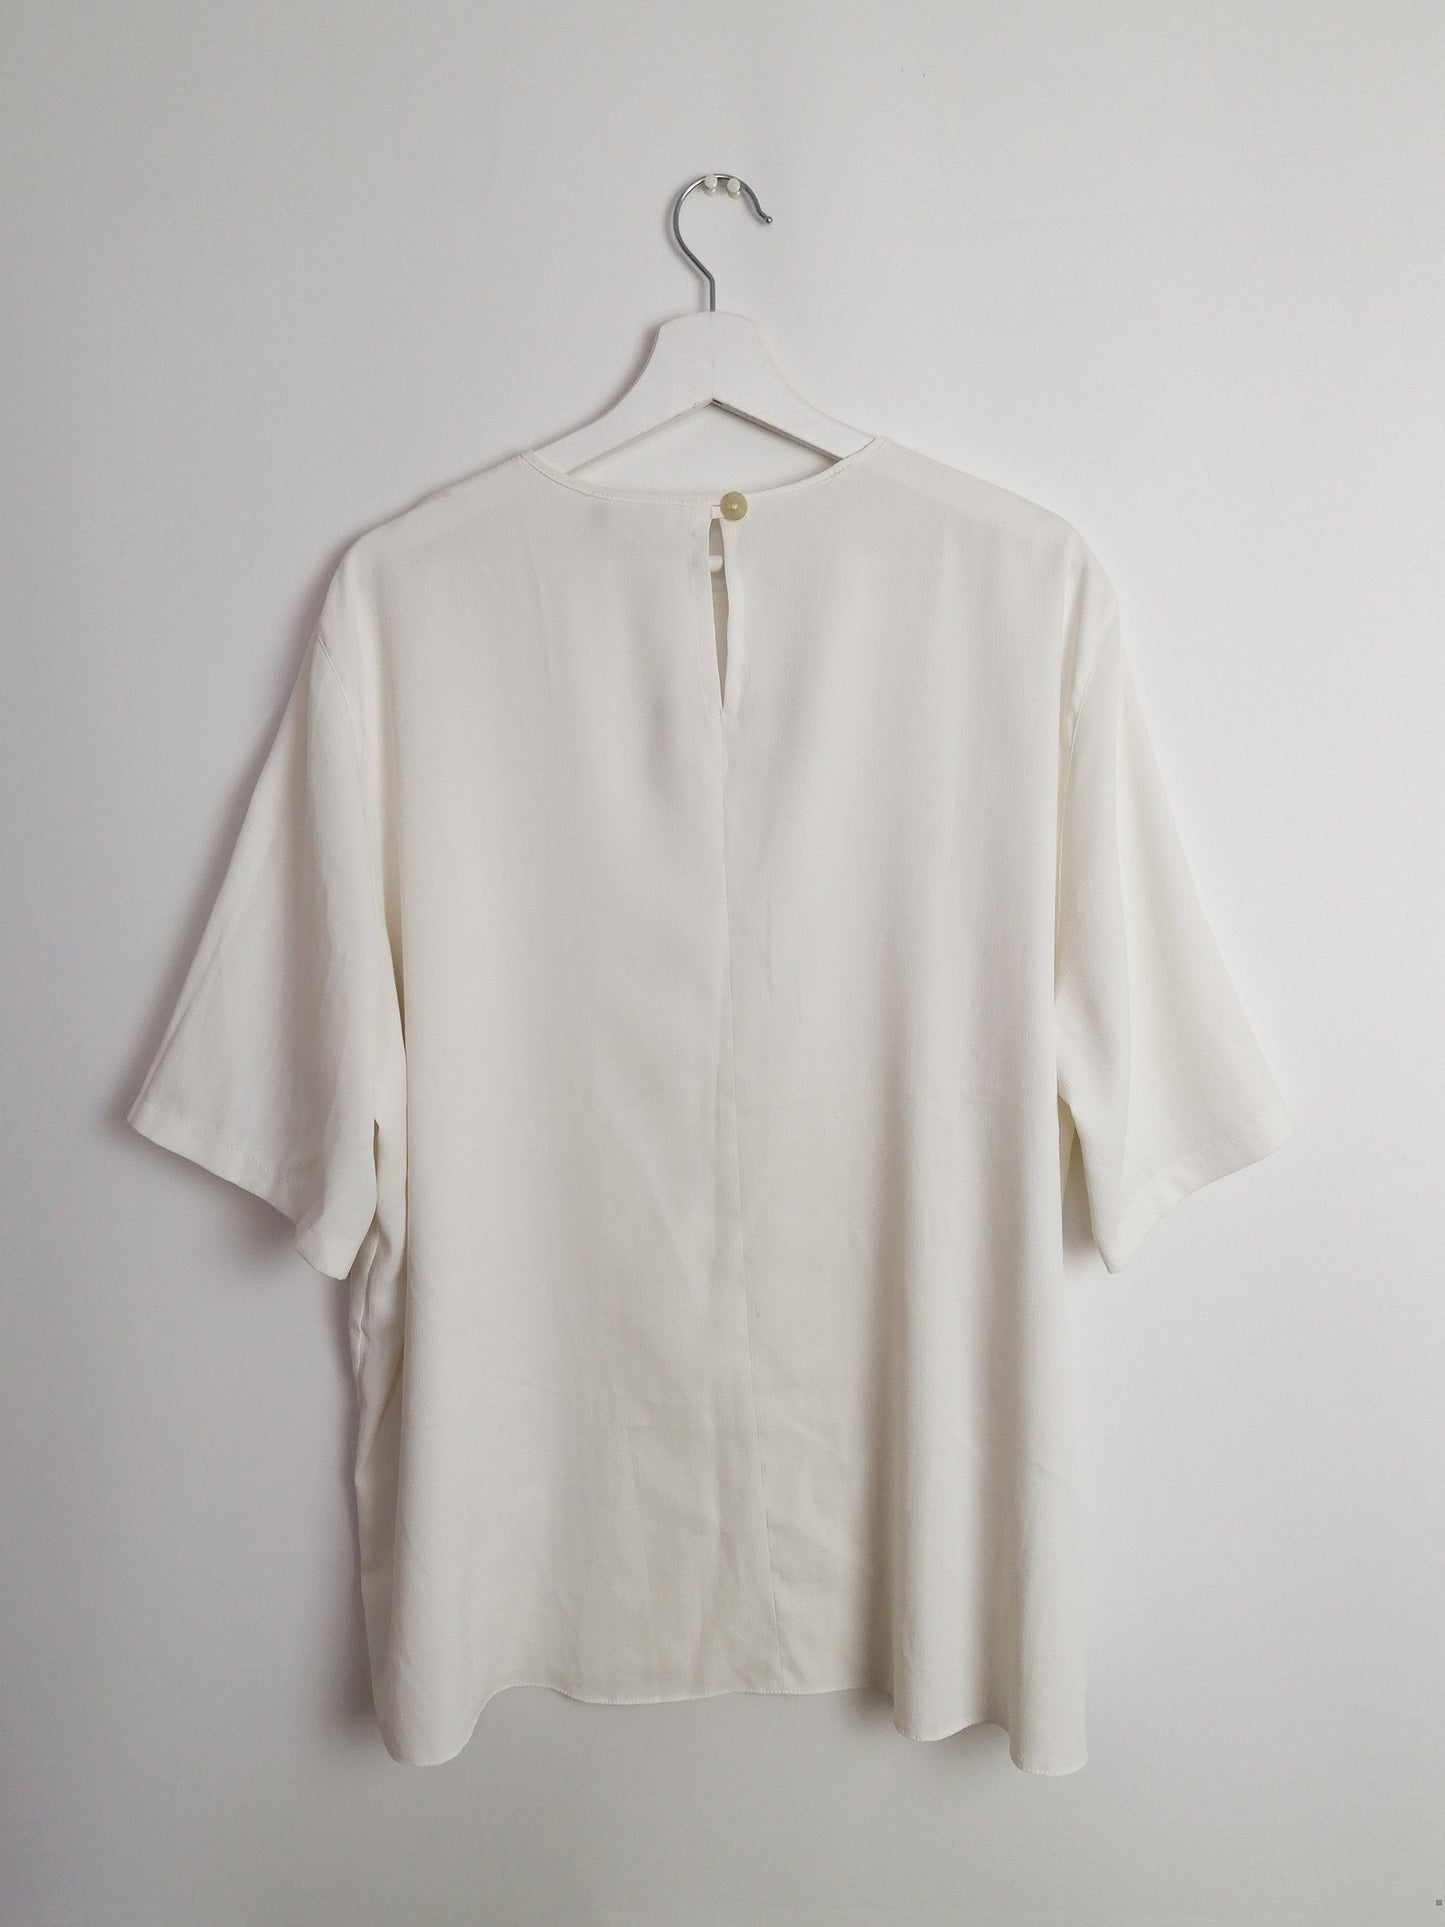 Vintage 90's Oversized Blouse Embroidery - size L-XL - GB 22 / US 18